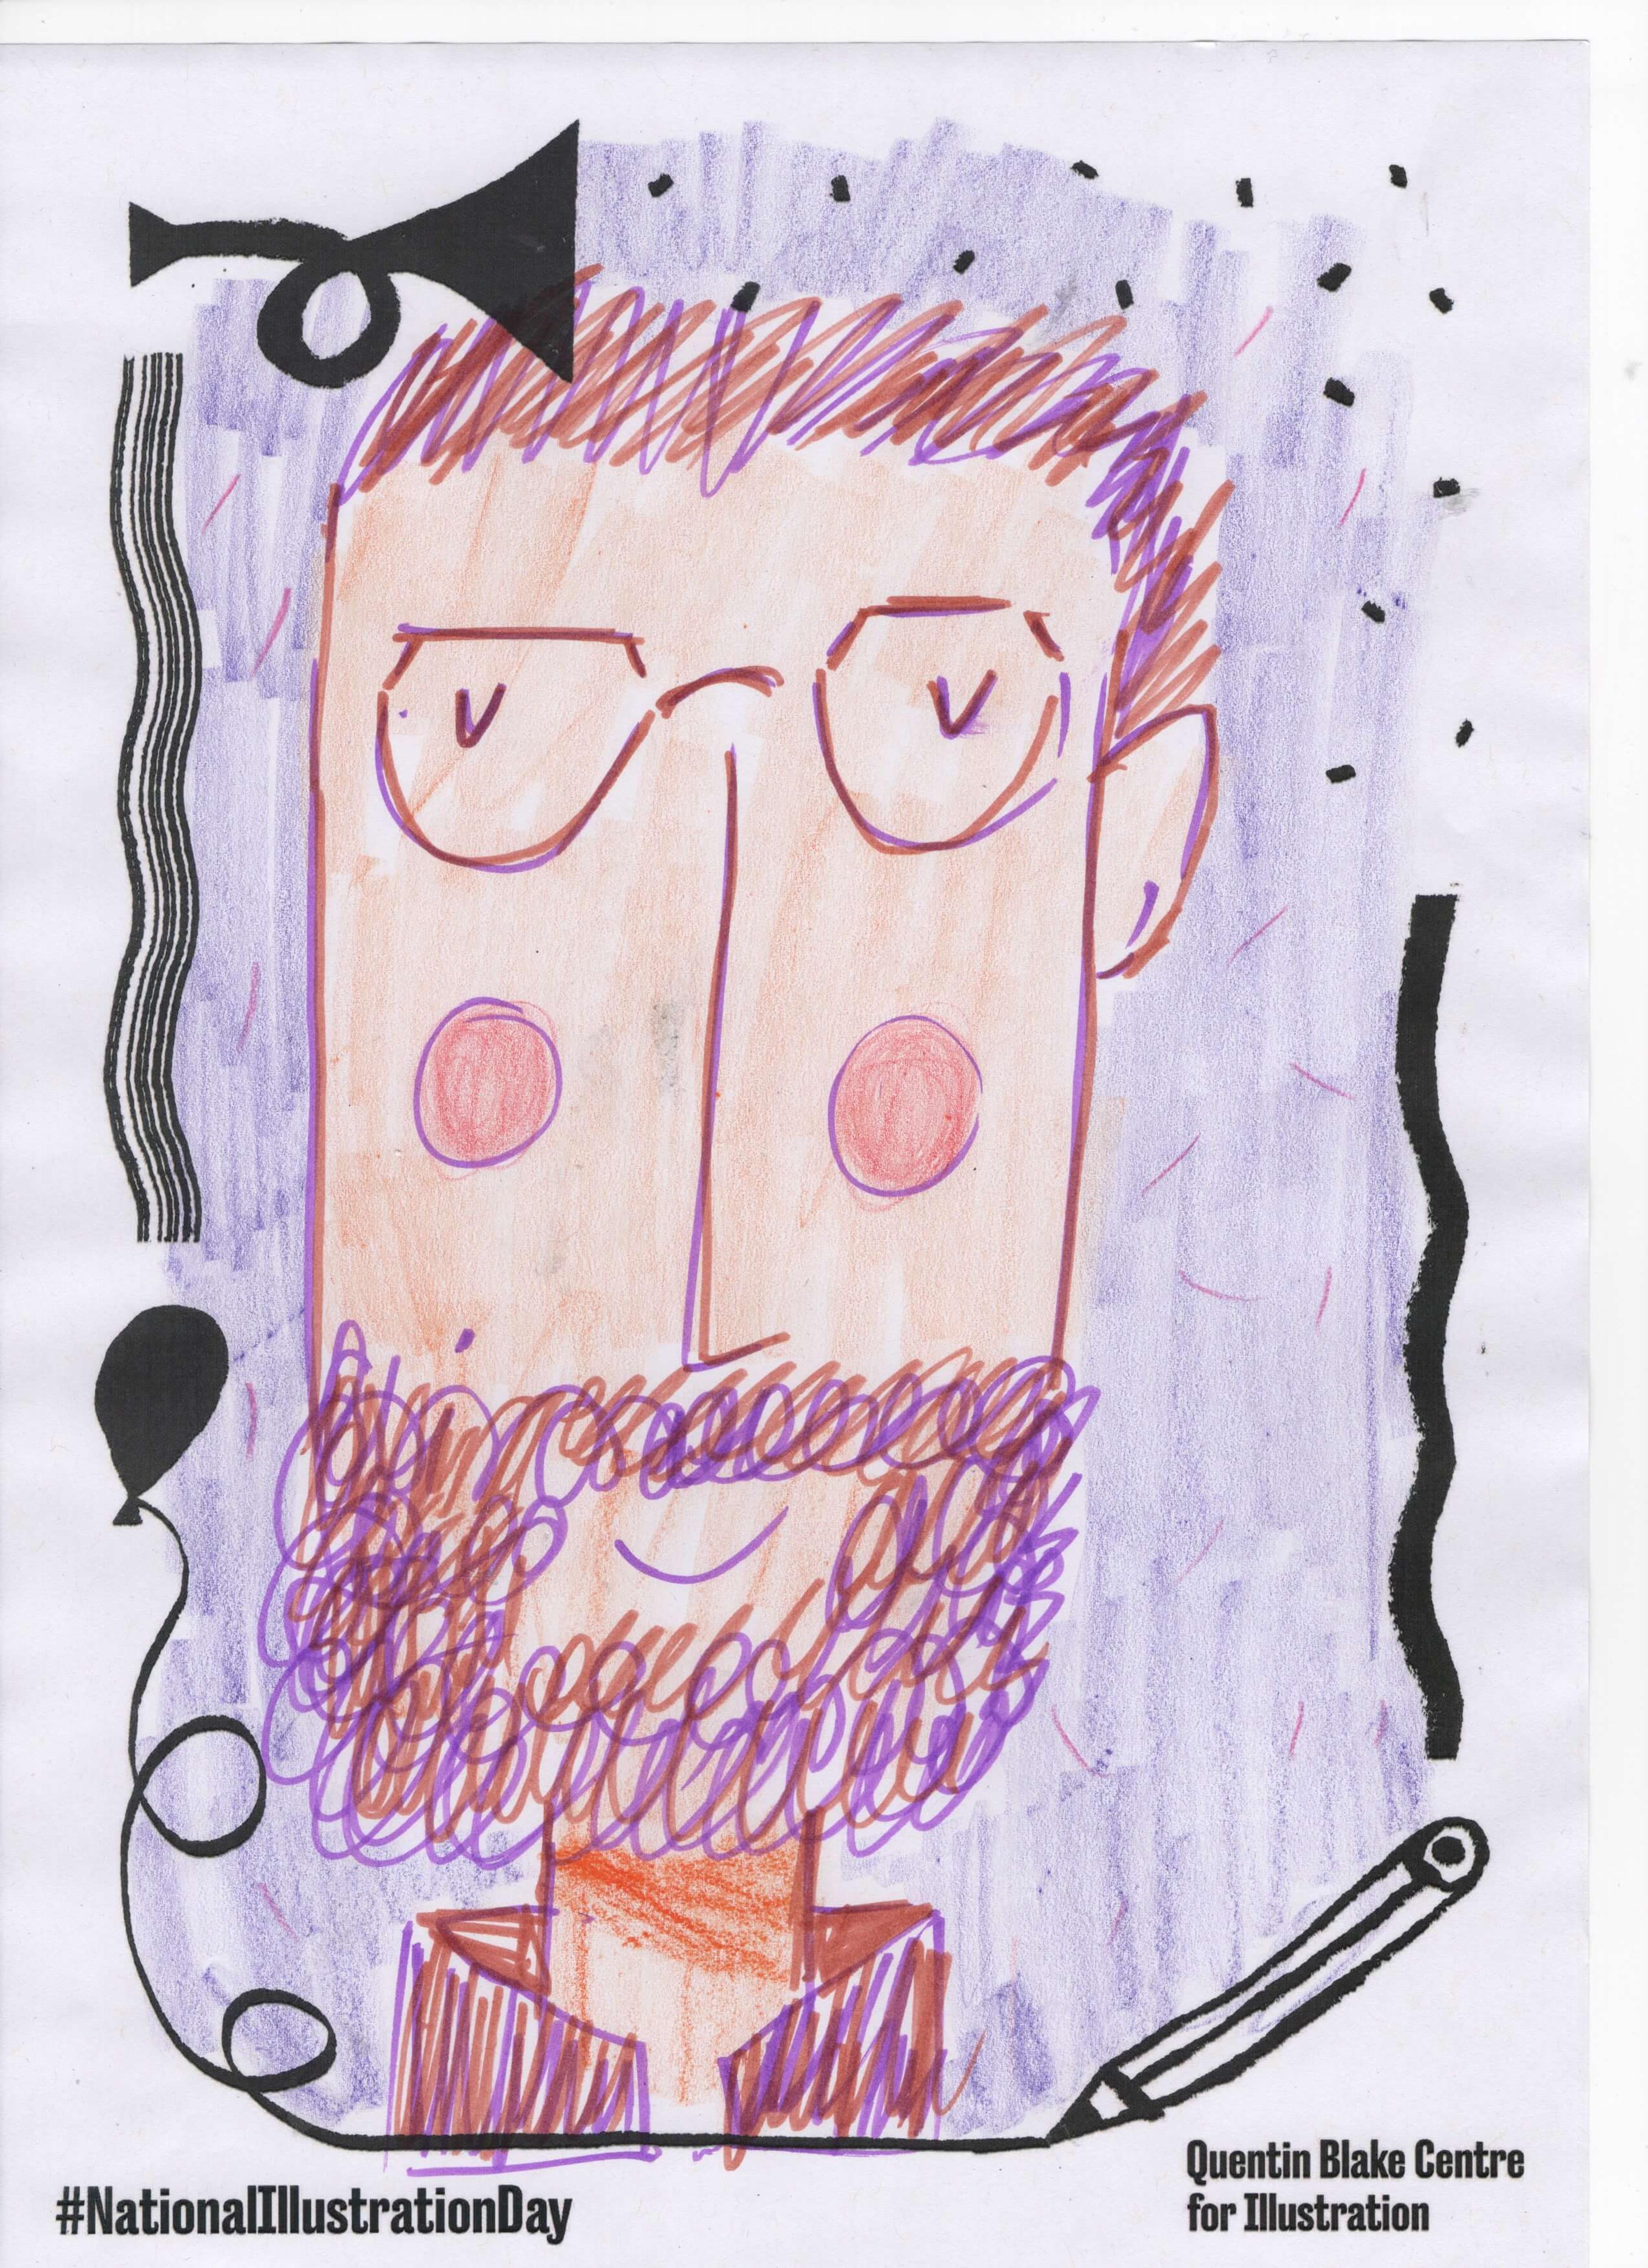 Cartoon illustration of a bearded person with glasses.